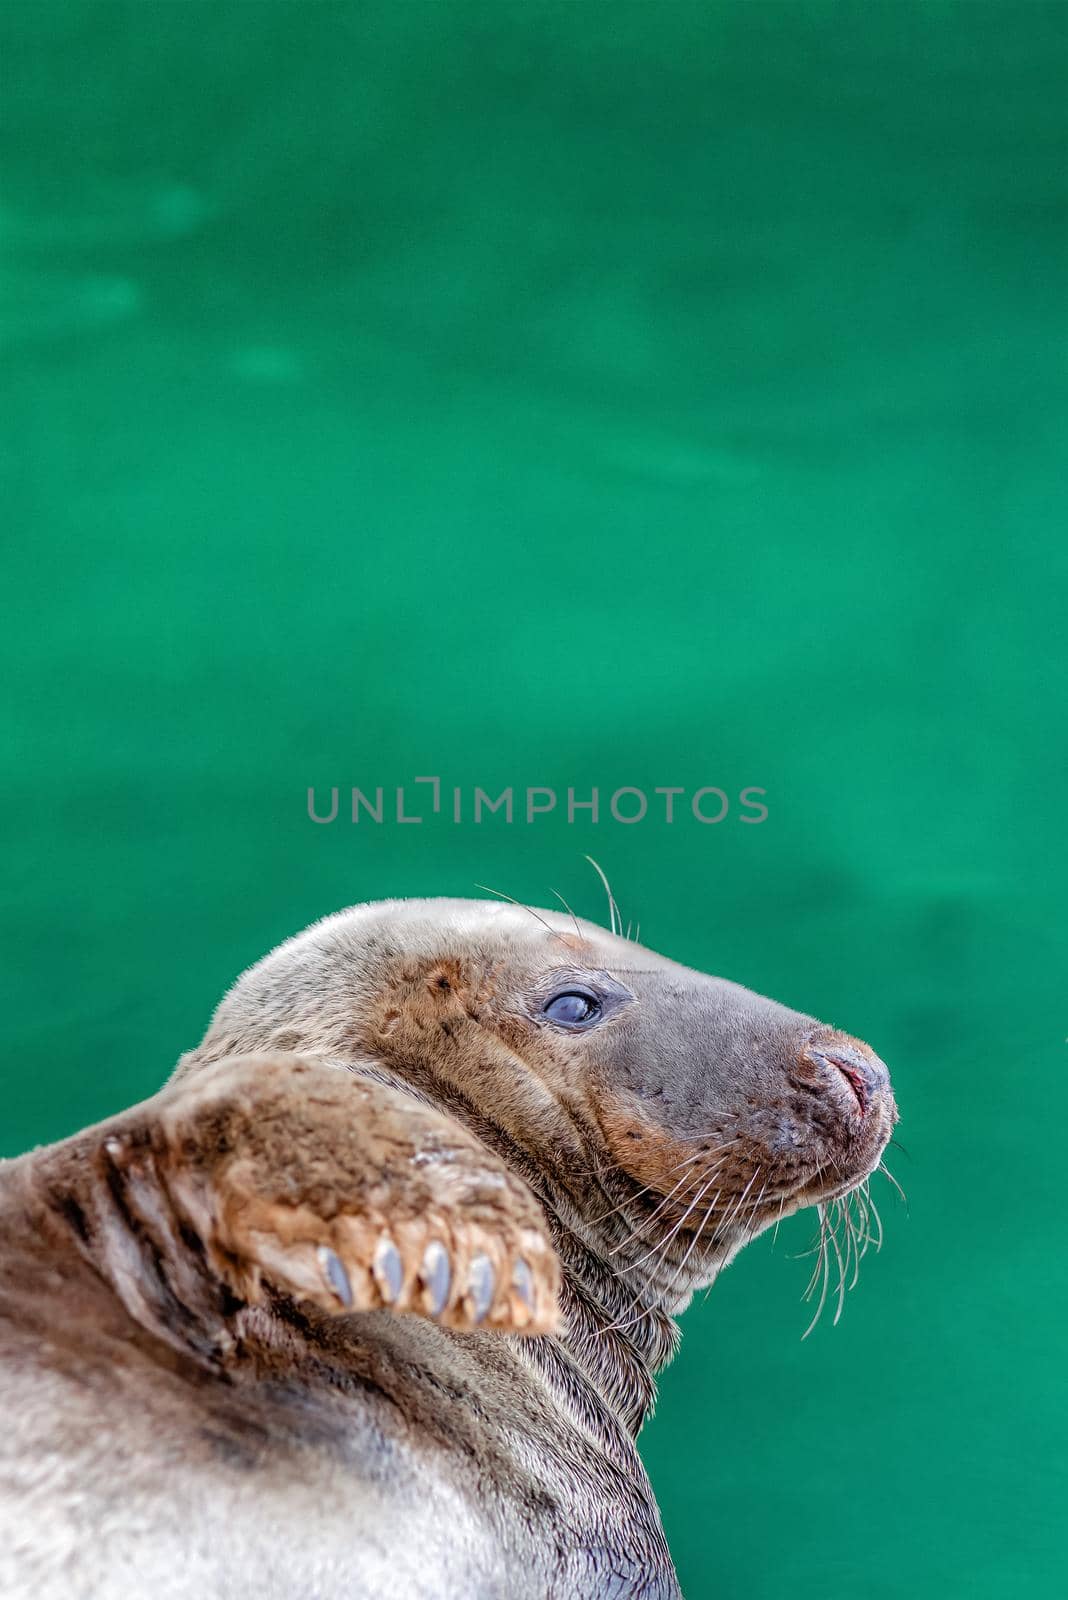 Atlantic gray seal, Halichoerus grypus, animal lying near dark green water, place for text with copy space.